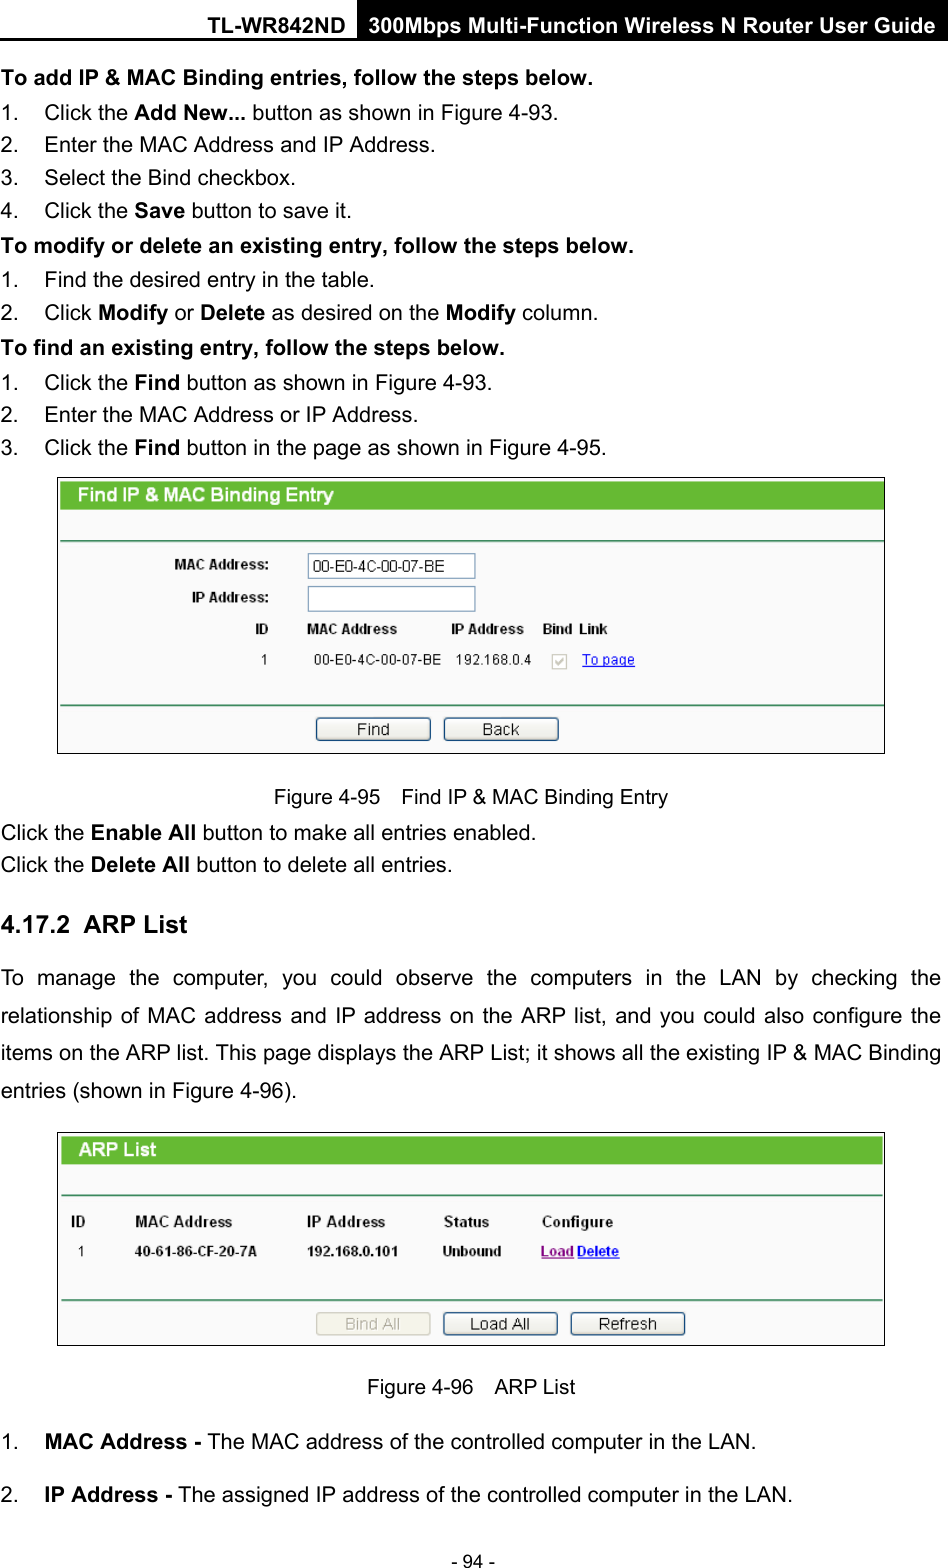 TL-WR842ND 300Mbps Multi-Function Wireless N Router User Guide  - 94 - To add IP &amp; MAC Binding entries, follow the steps below. 1. Click the Add New... button as shown in Figure 4-93.   2. Enter the MAC Address and IP Address. 3. Select the Bind checkbox.   4. Click the Save button to save it. To modify or delete an existing entry, follow the steps below. 1. Find the desired entry in the table.   2. Click Modify or Delete as desired on the Modify column.   To find an existing entry, follow the steps below. 1. Click the Find button as shown in Figure 4-93. 2. Enter the MAC Address or IP Address. 3. Click the Find button in the page as shown in Figure 4-95.  Figure 4-95  Find IP &amp; MAC Binding Entry Click the Enable All button to make all entries enabled. Click the Delete All button to delete all entries. 4.17.2 ARP List To manage the computer, you could observe the computers in the LAN by checking the relationship of MAC address and IP address on the ARP list, and you could also configure the items on the ARP list. This page displays the ARP List; it shows all the existing IP &amp; MAC Binding entries (shown in Figure 4-96).    Figure 4-96  ARP List 1. MAC Address - The MAC address of the controlled computer in the LAN.   2. IP Address - The assigned IP address of the controlled computer in the LAN.   